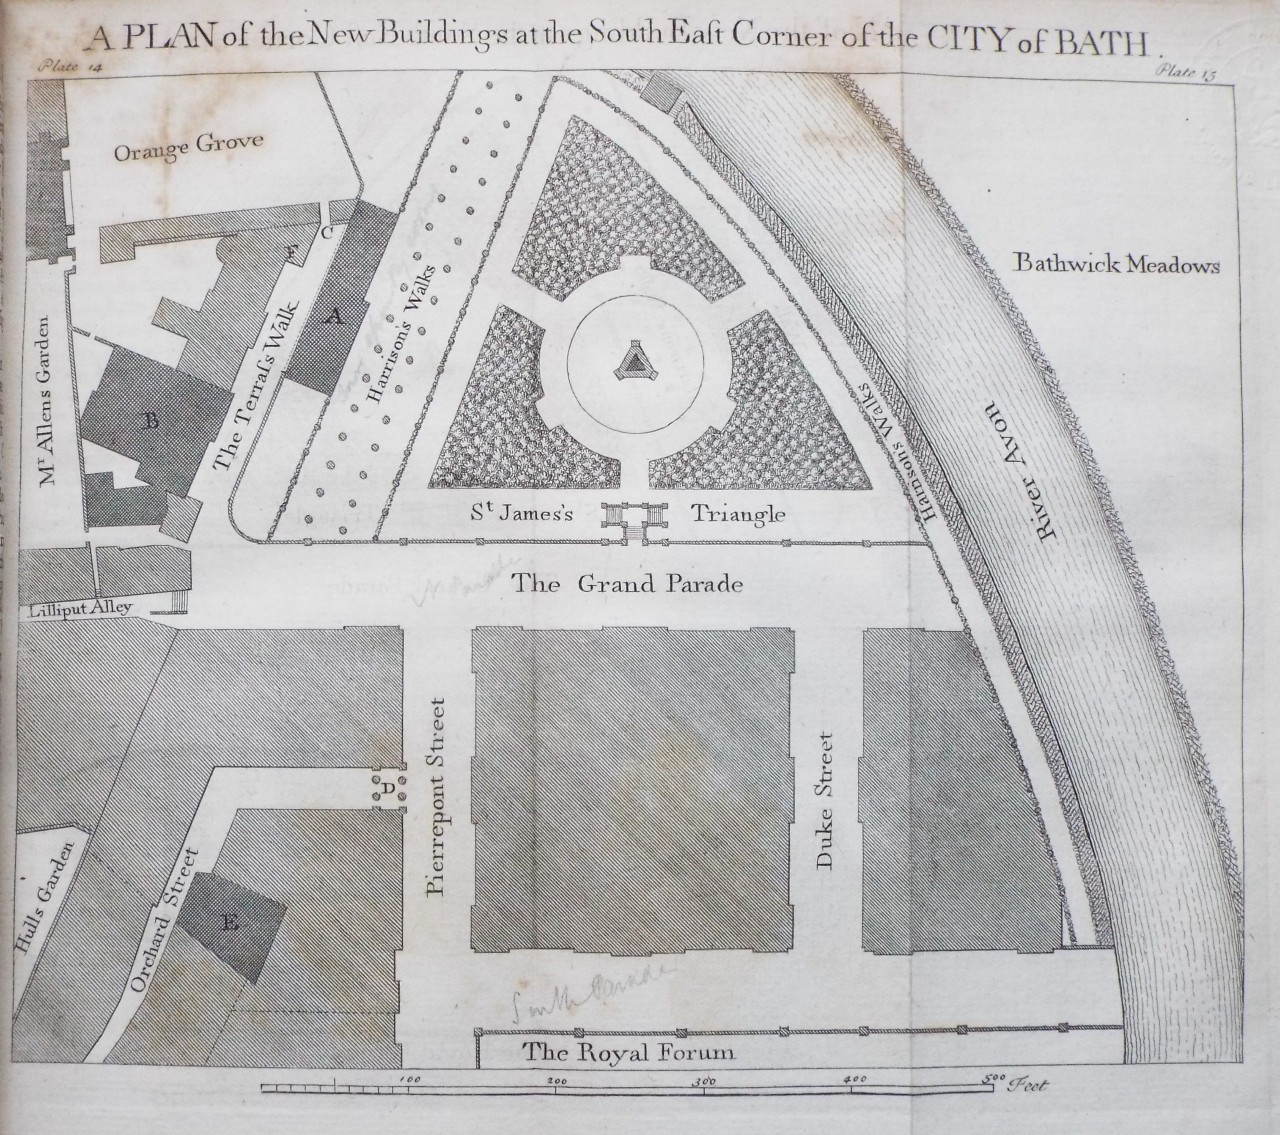 Print - A Plan of the New Buildings at the South East Corner of the City of Bath